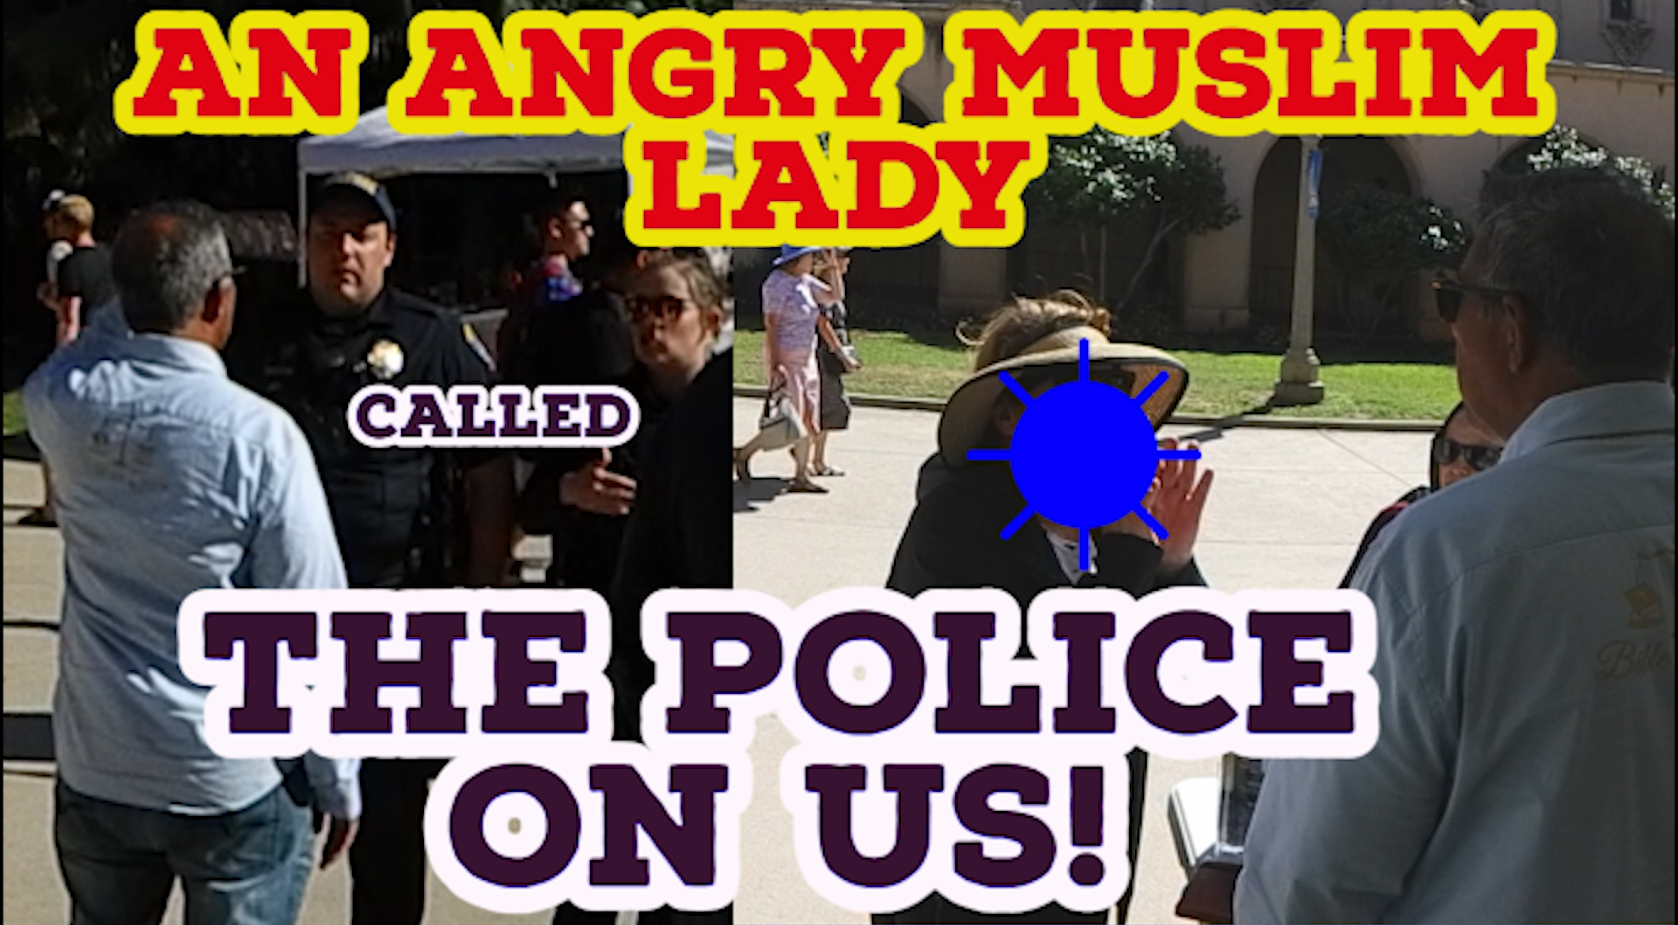 An angry Muslim lady called the Police on us!